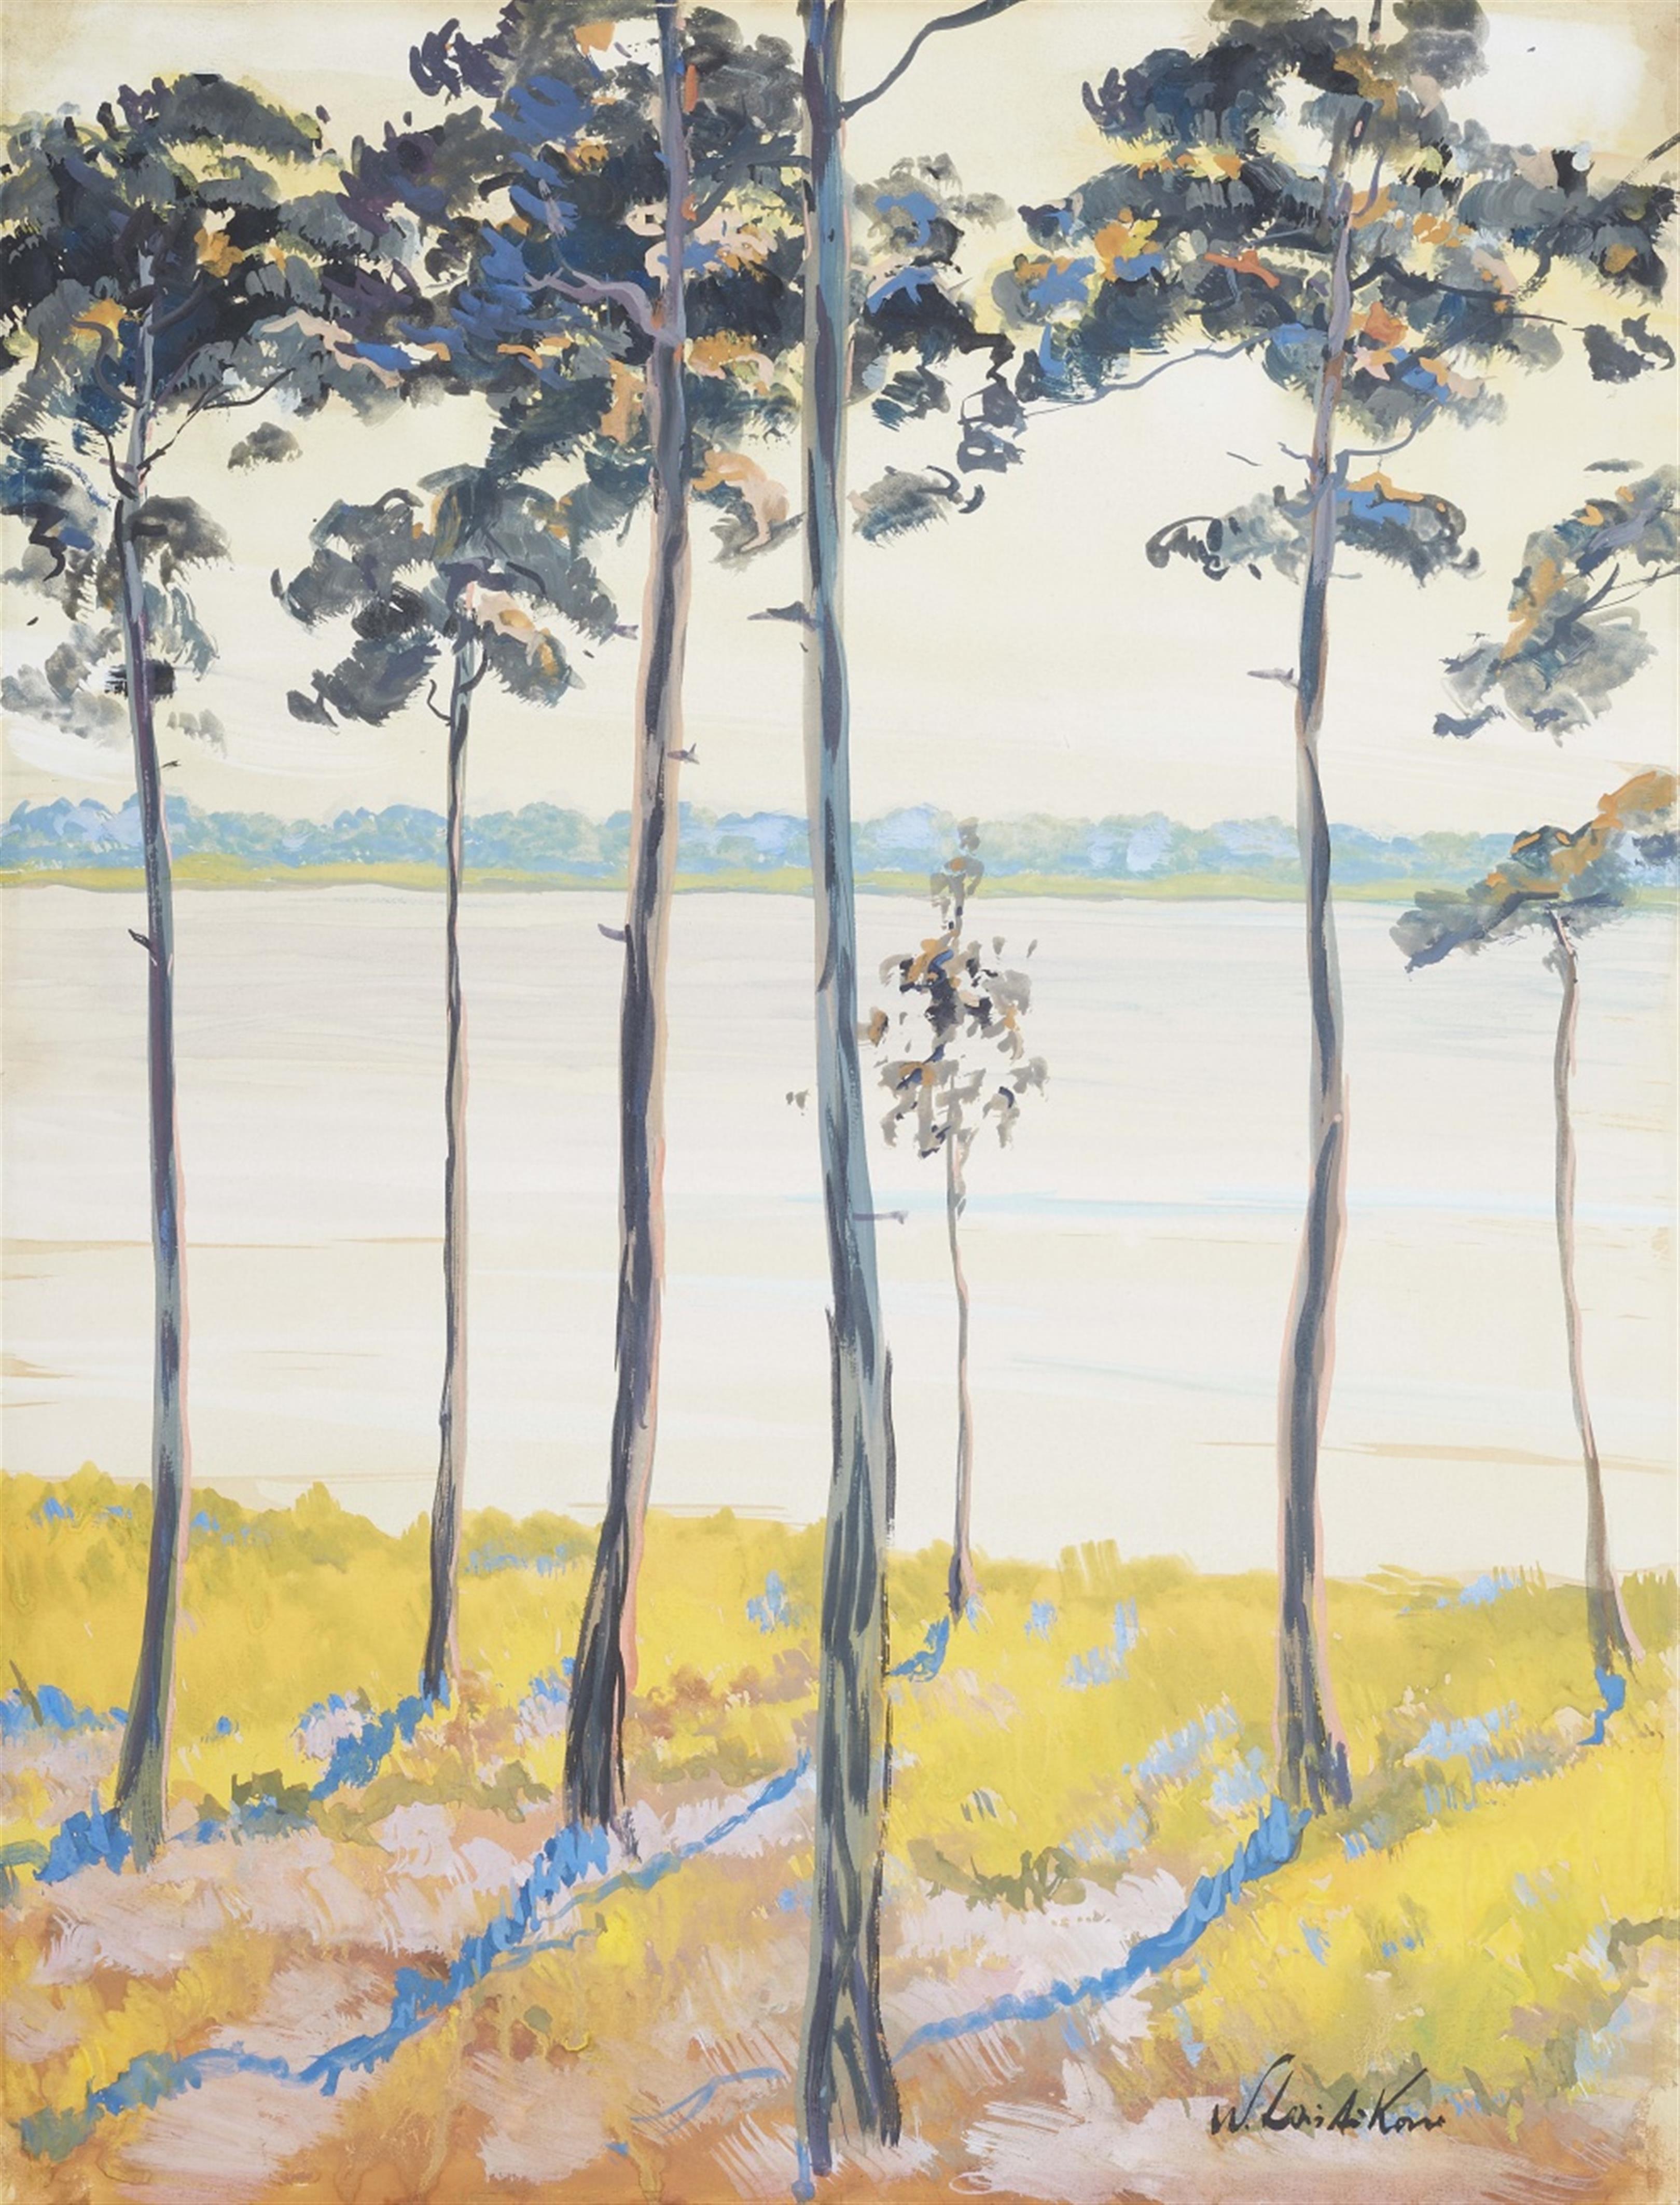 Walter Leistikow - Märkischer See / Pines by the Banks of a Lake in the Mark Region - image-1